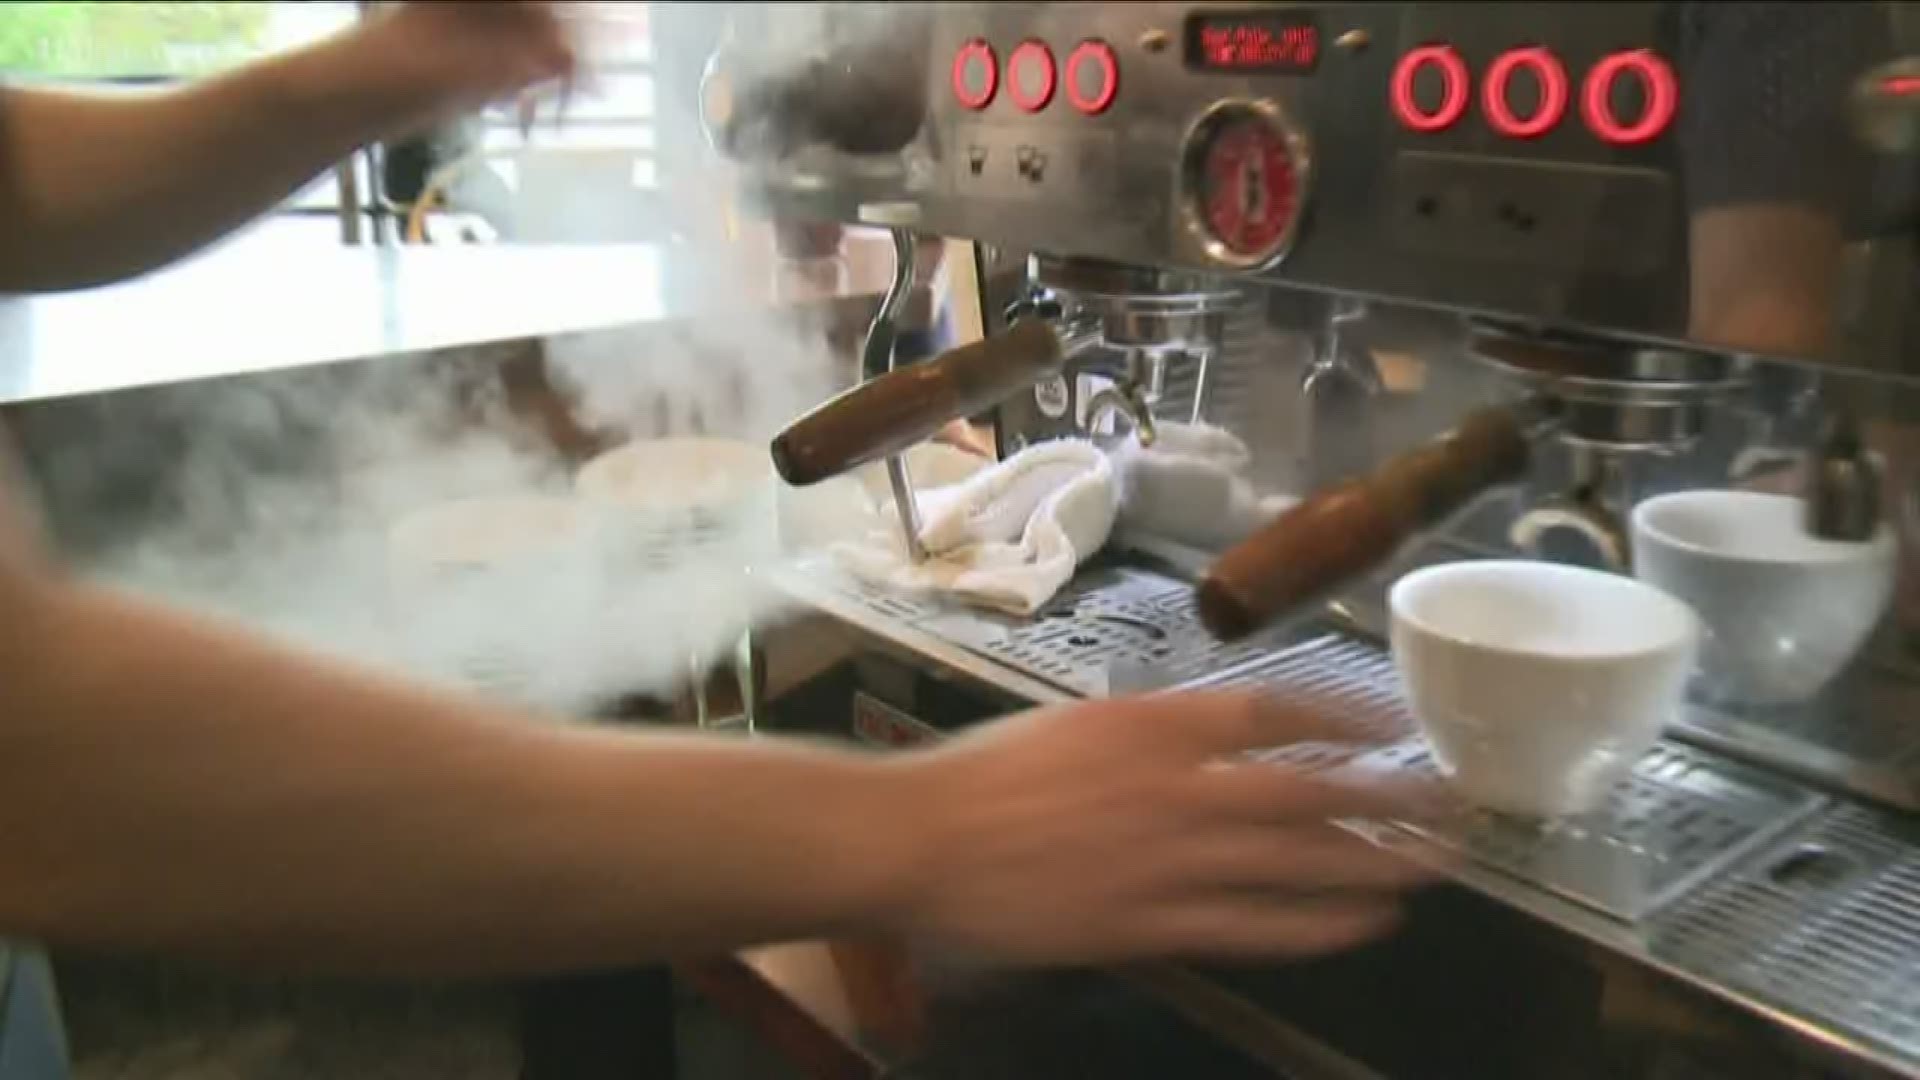 11Alive's Crash Clark experiences a day in the life of a master barista.